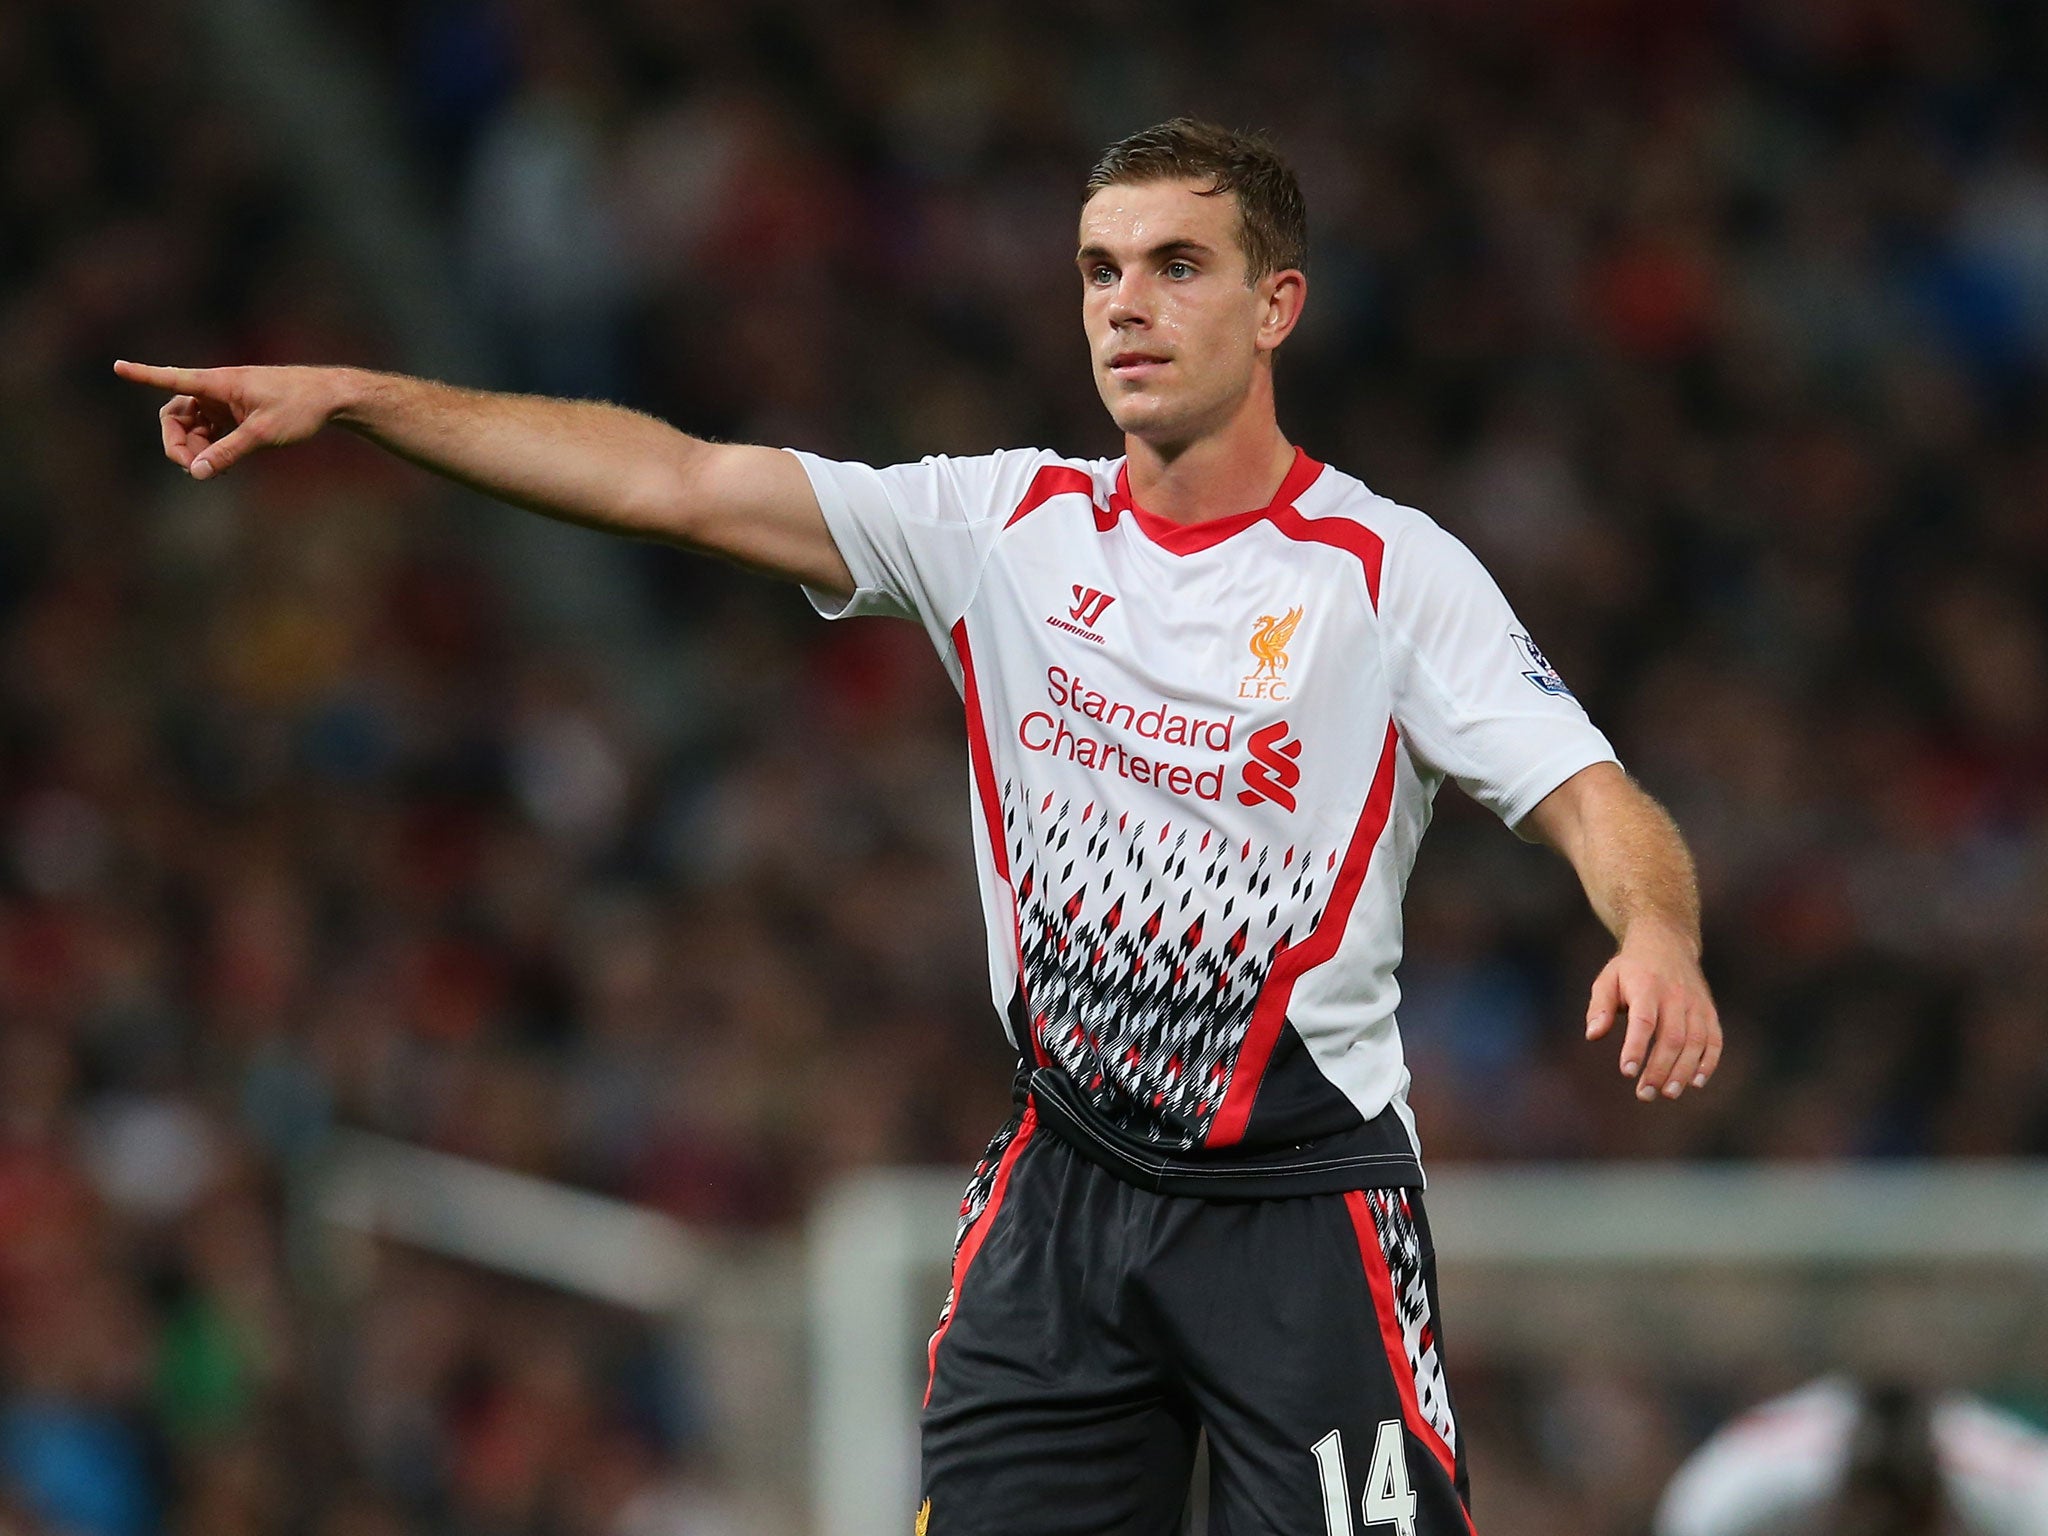 Liverpool midfielder Jordan Henderson has set himself the task of making Roy Hodgson's England squad for next year's World Cup